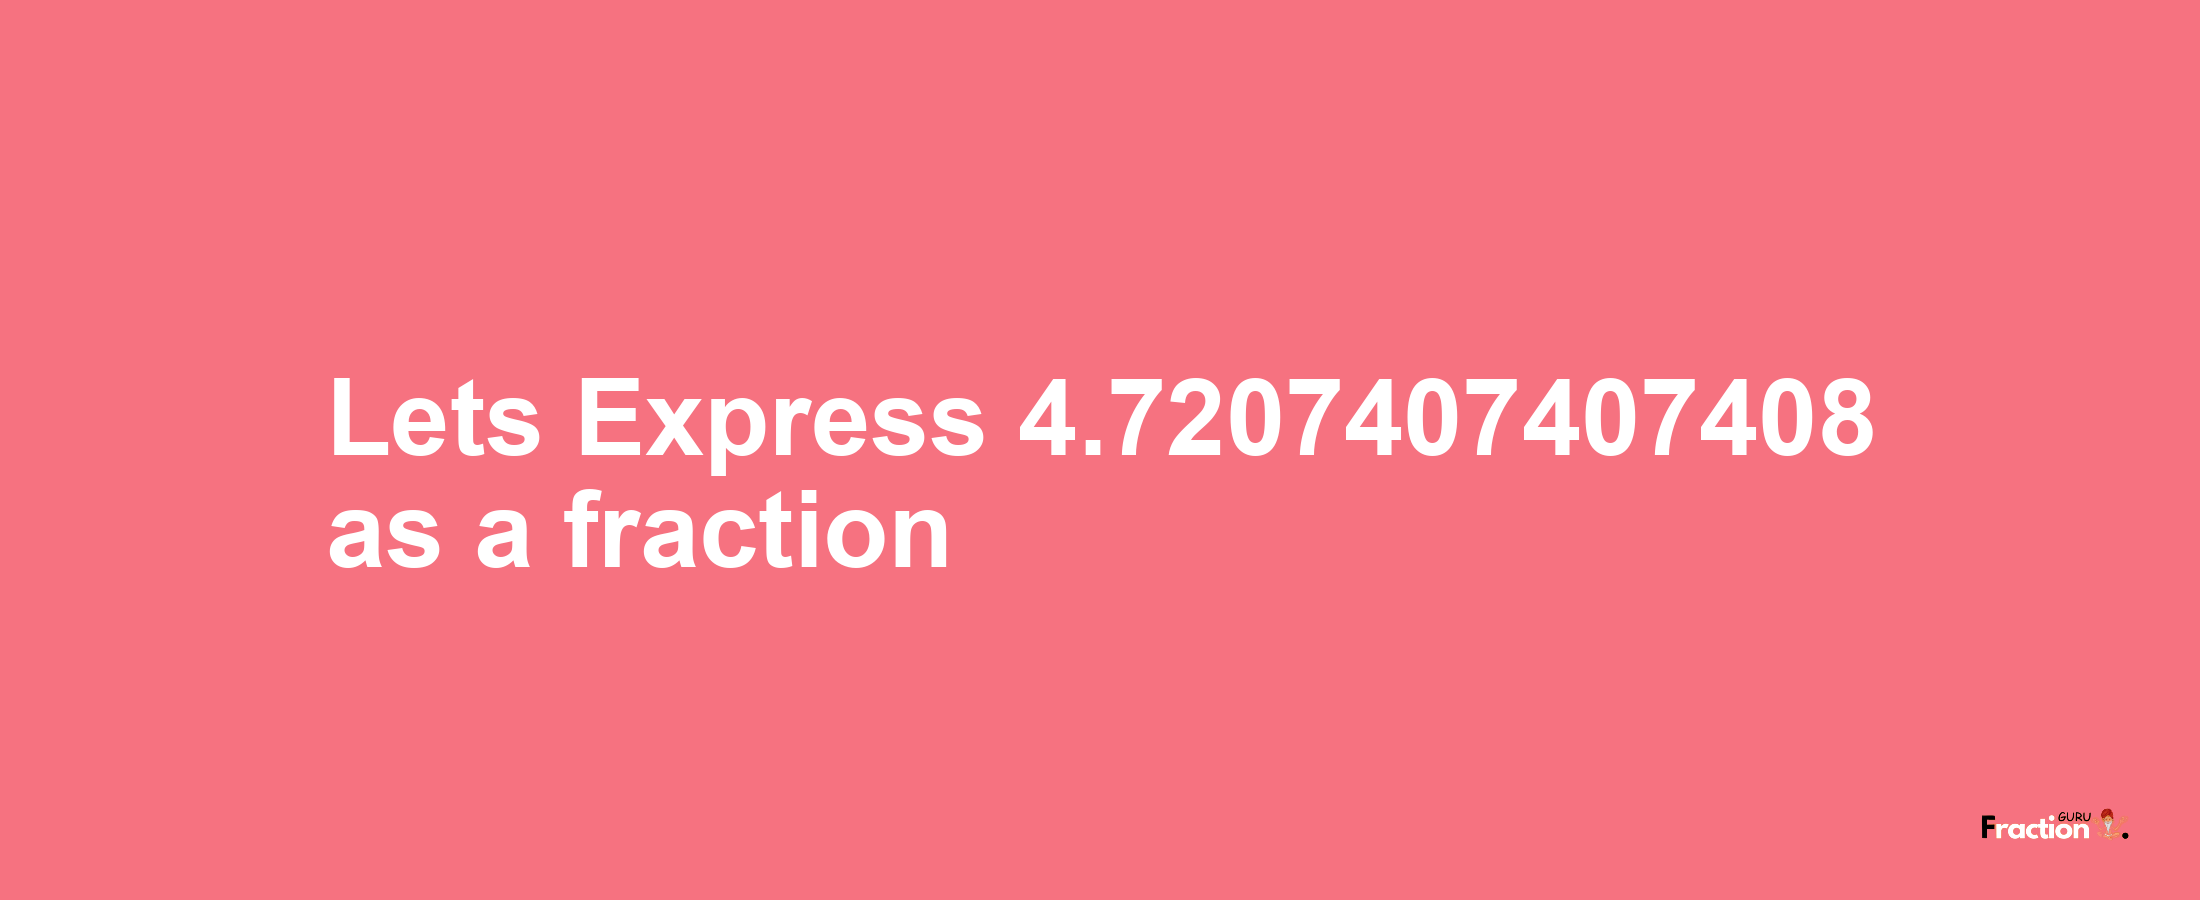 Lets Express 4.7207407407408 as afraction